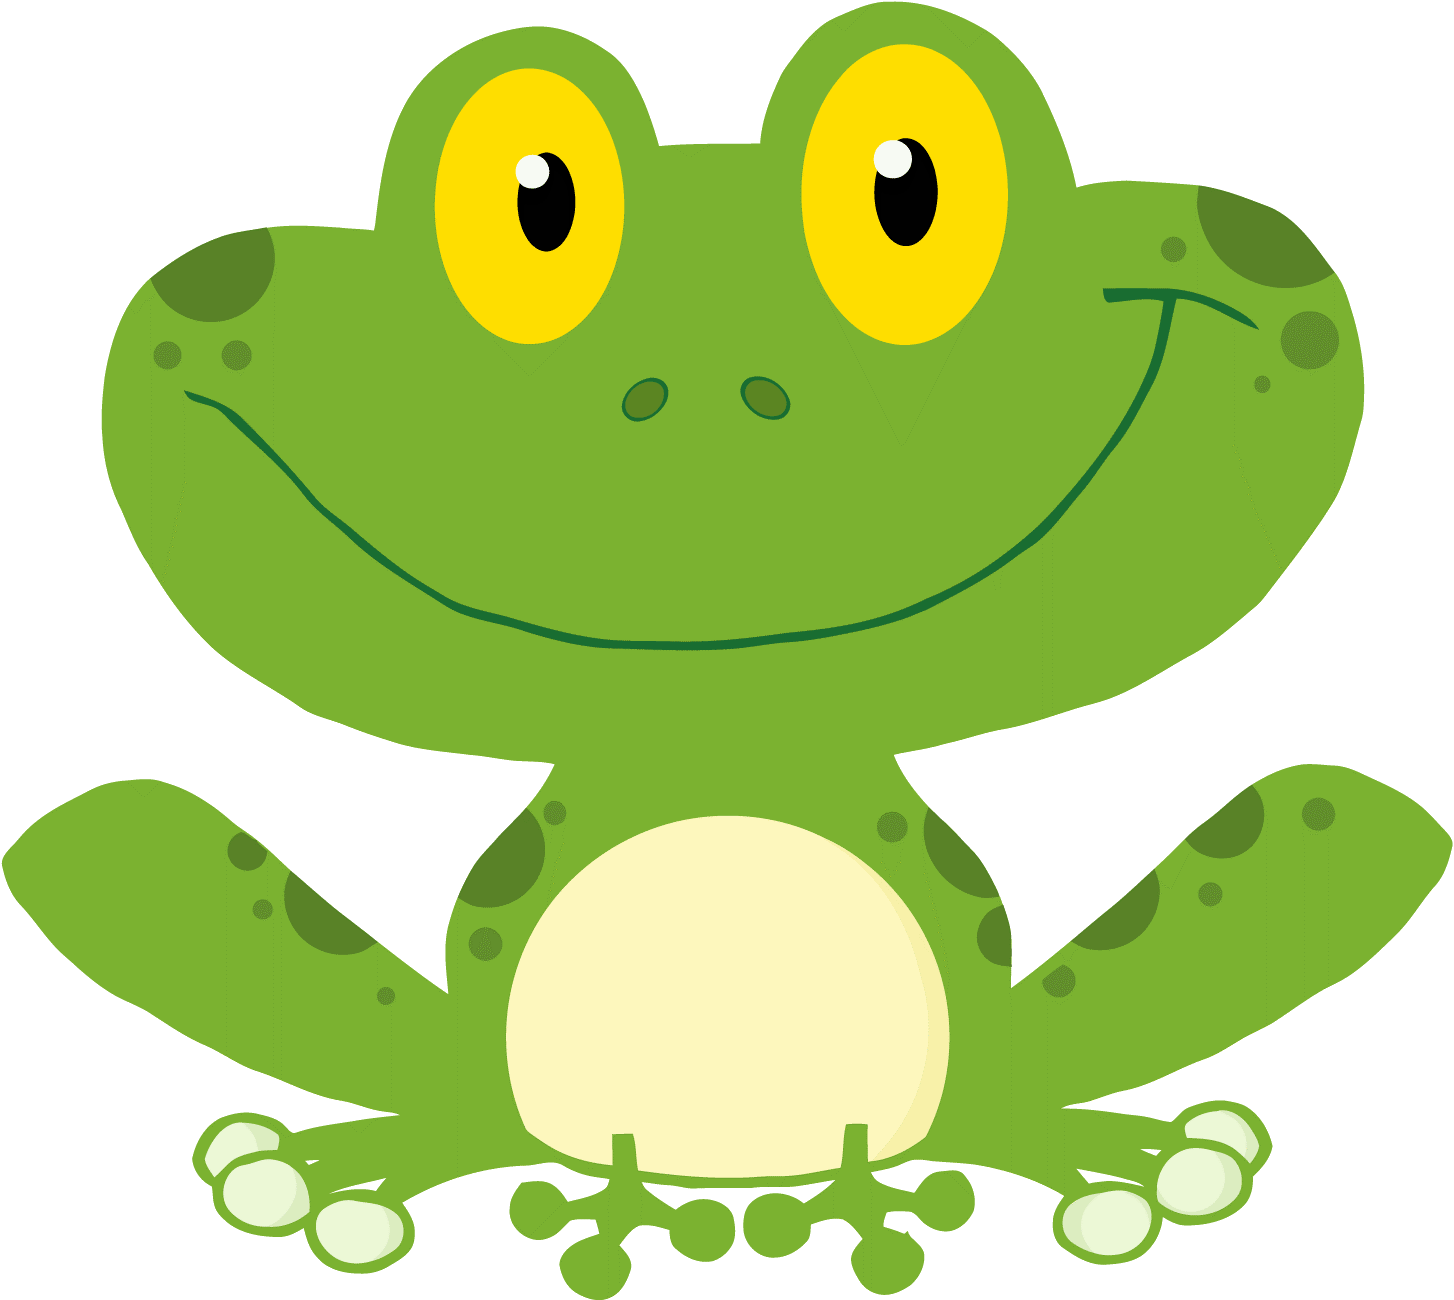 Toad clipart angry frog.  kindergarten ms puentes